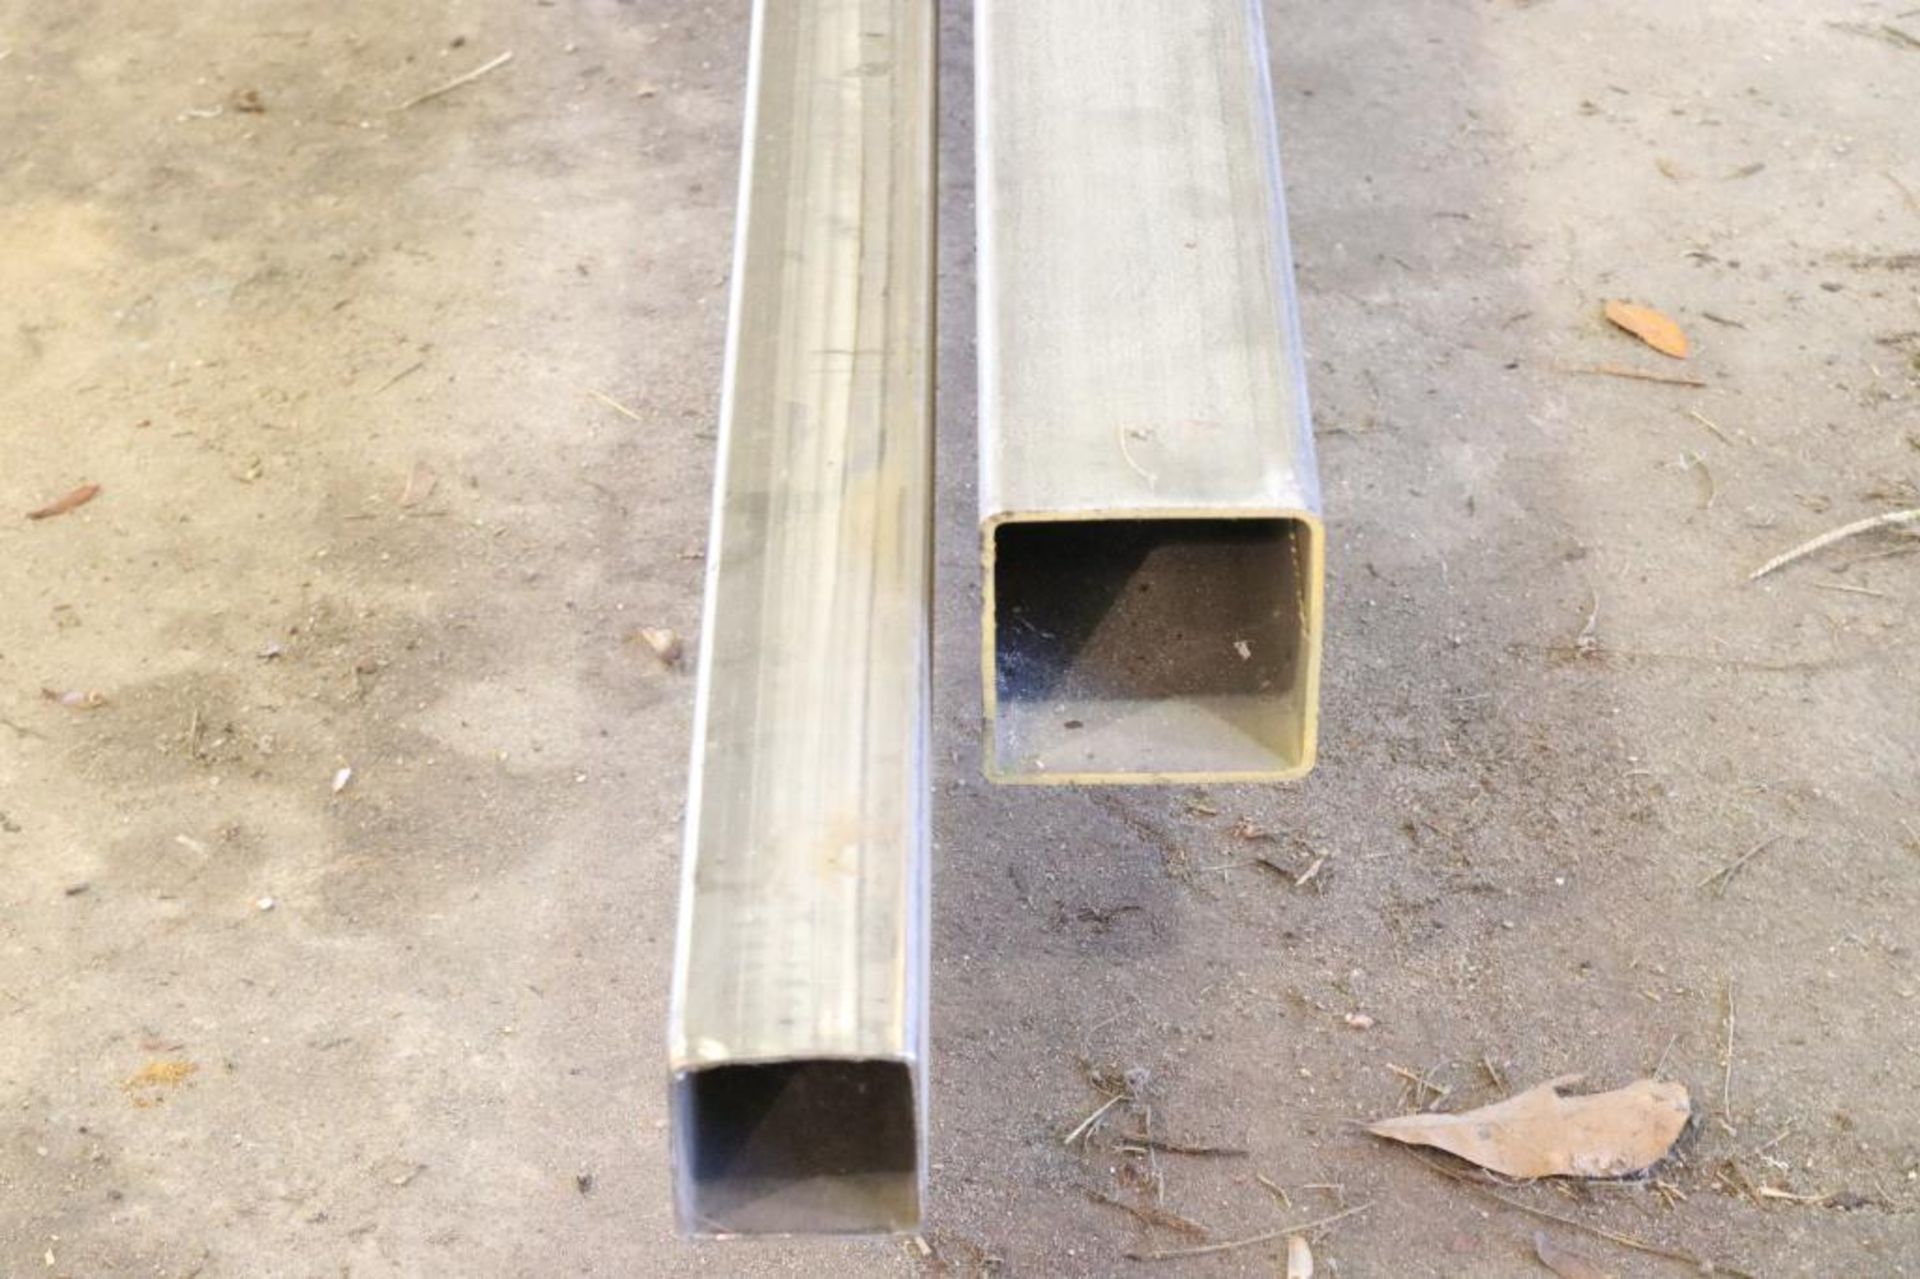 15 Ft. x 1 1/4" Sq Tube - Stainless - Image 2 of 4